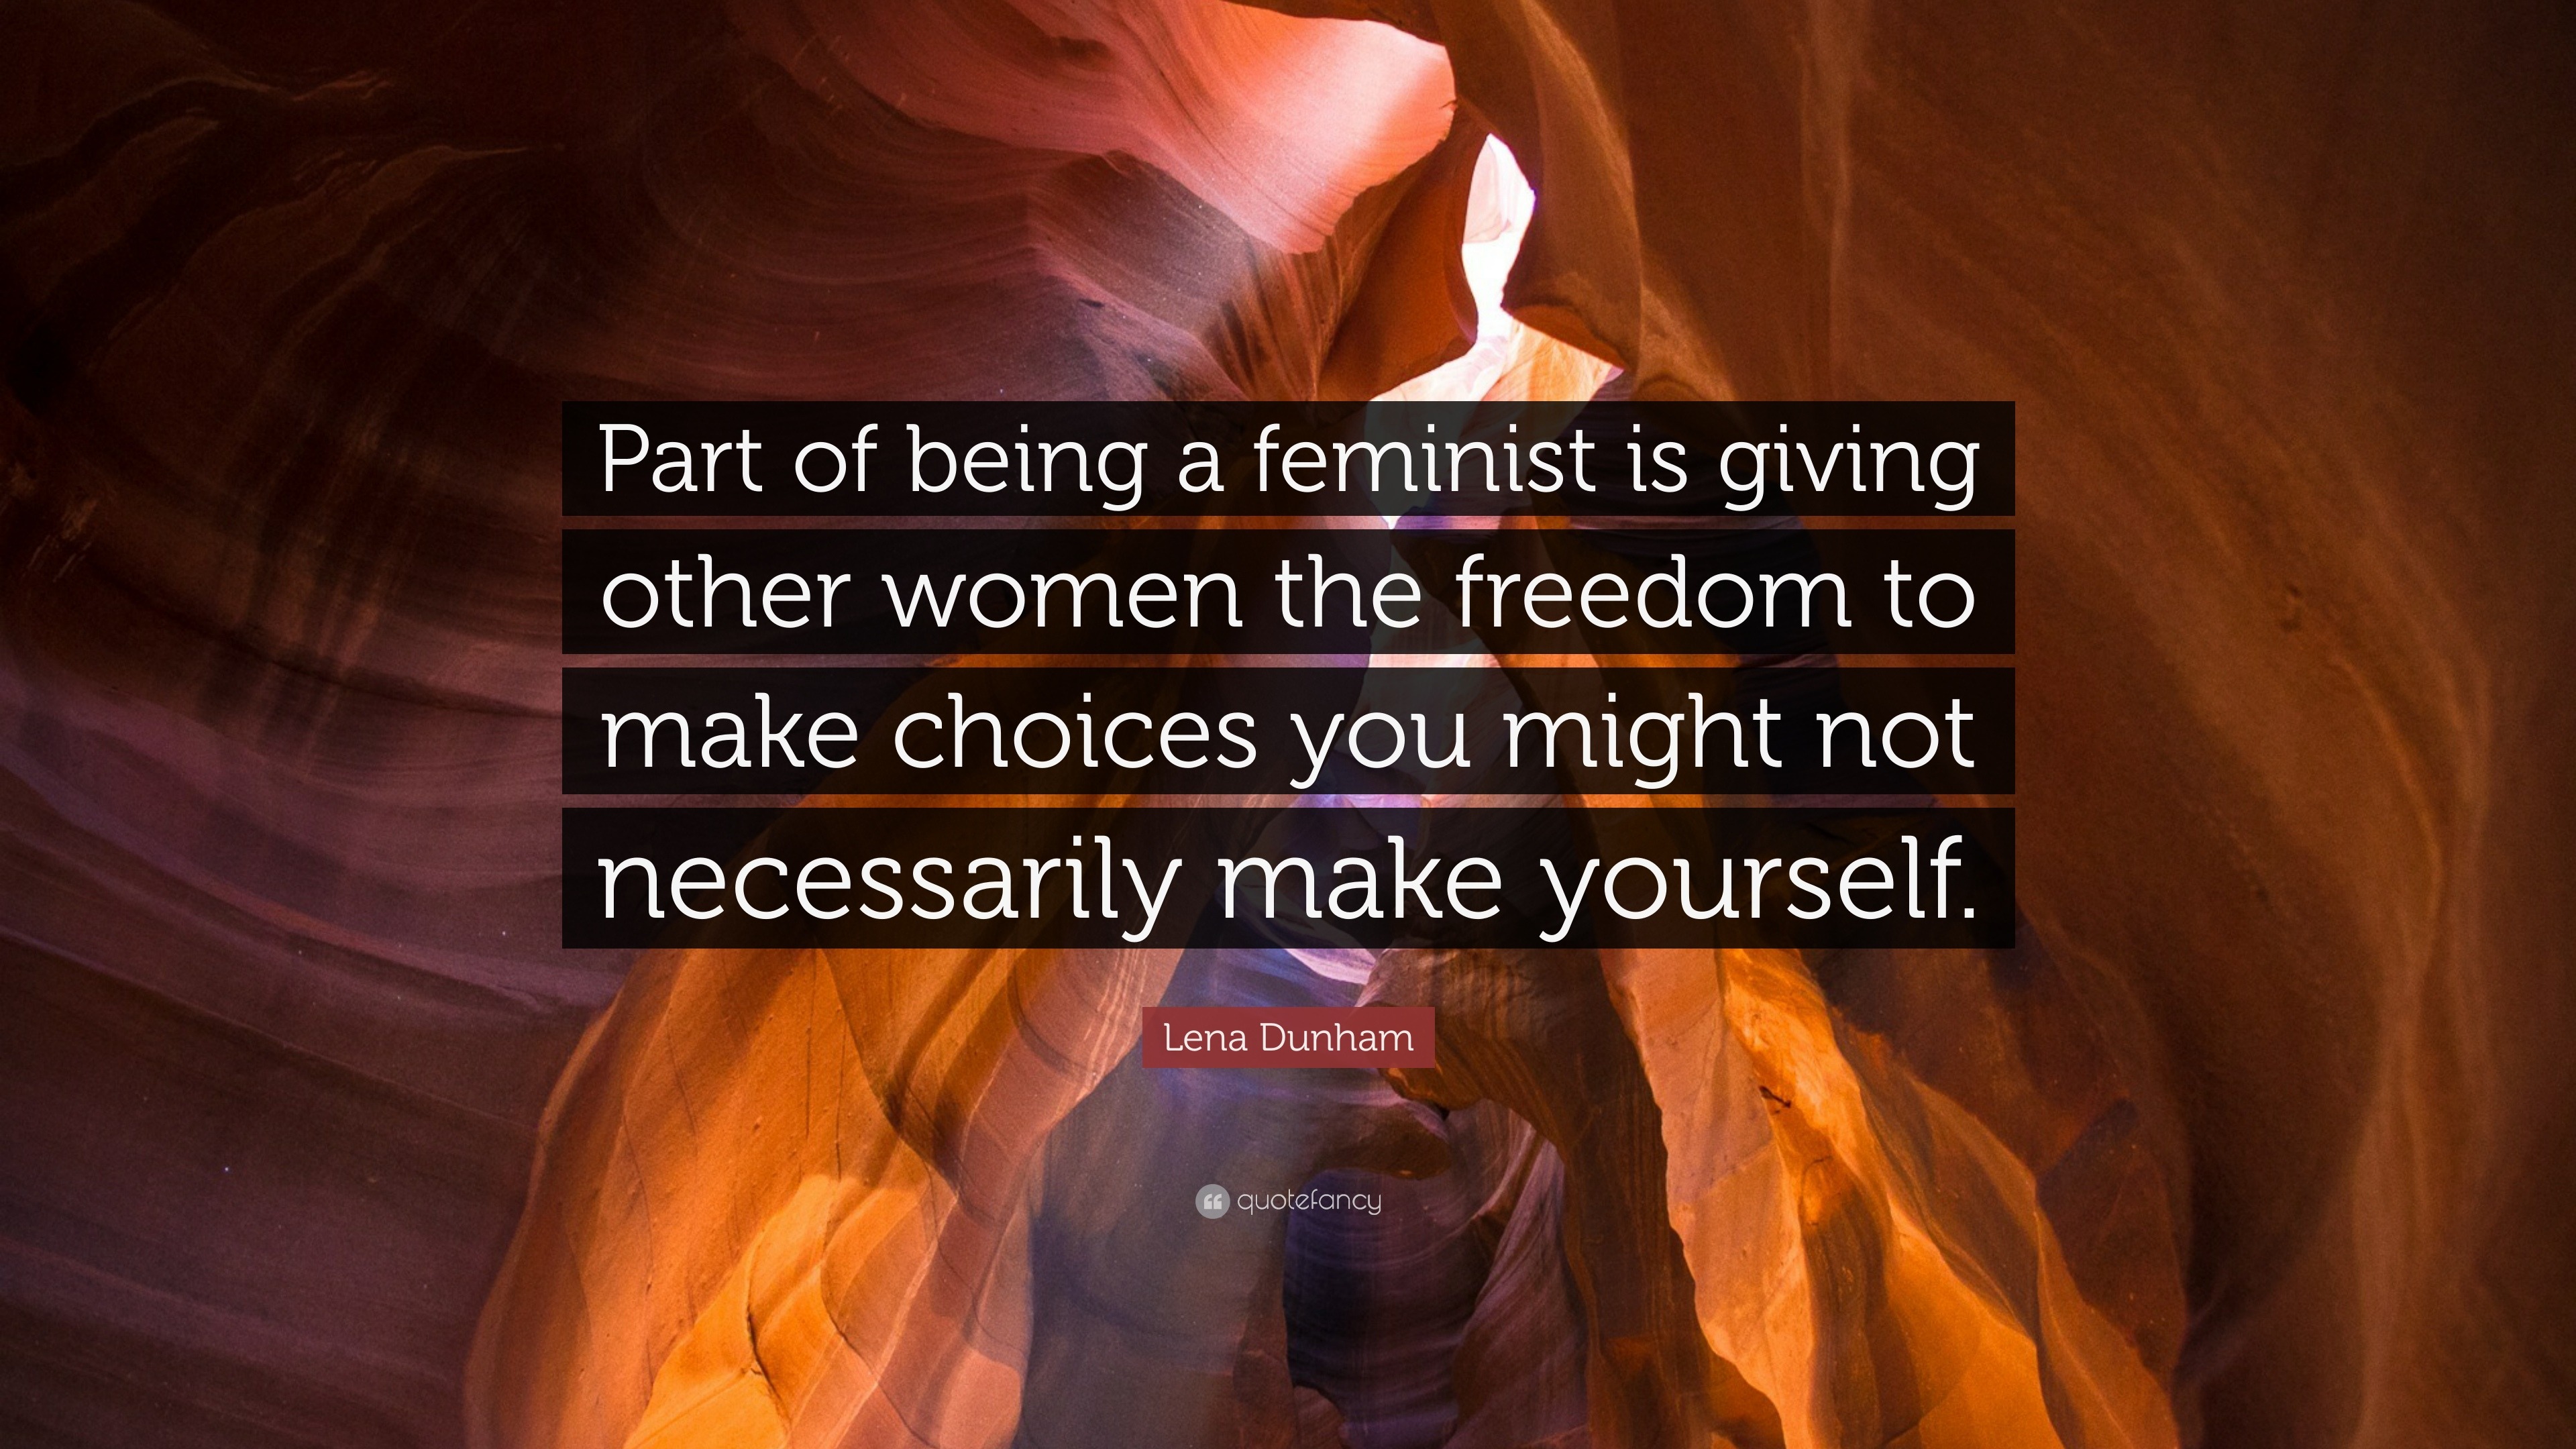 Lena Dunham Quote: “Part of being a feminist is giving other women the ...